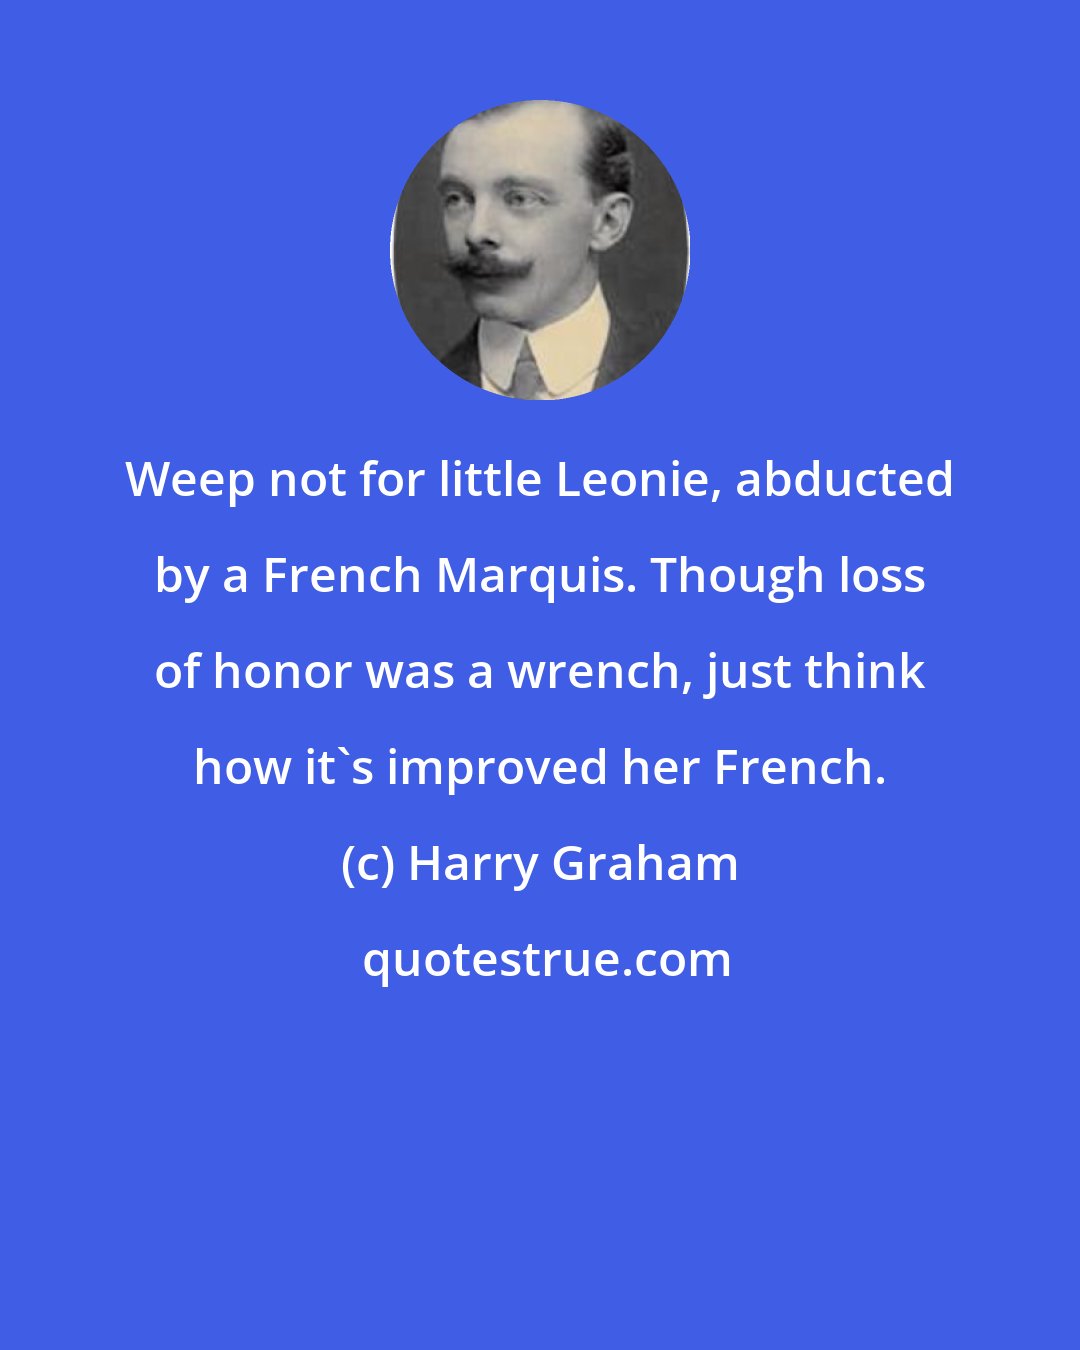 Harry Graham: Weep not for little Leonie, abducted by a French Marquis. Though loss of honor was a wrench, just think how it's improved her French.